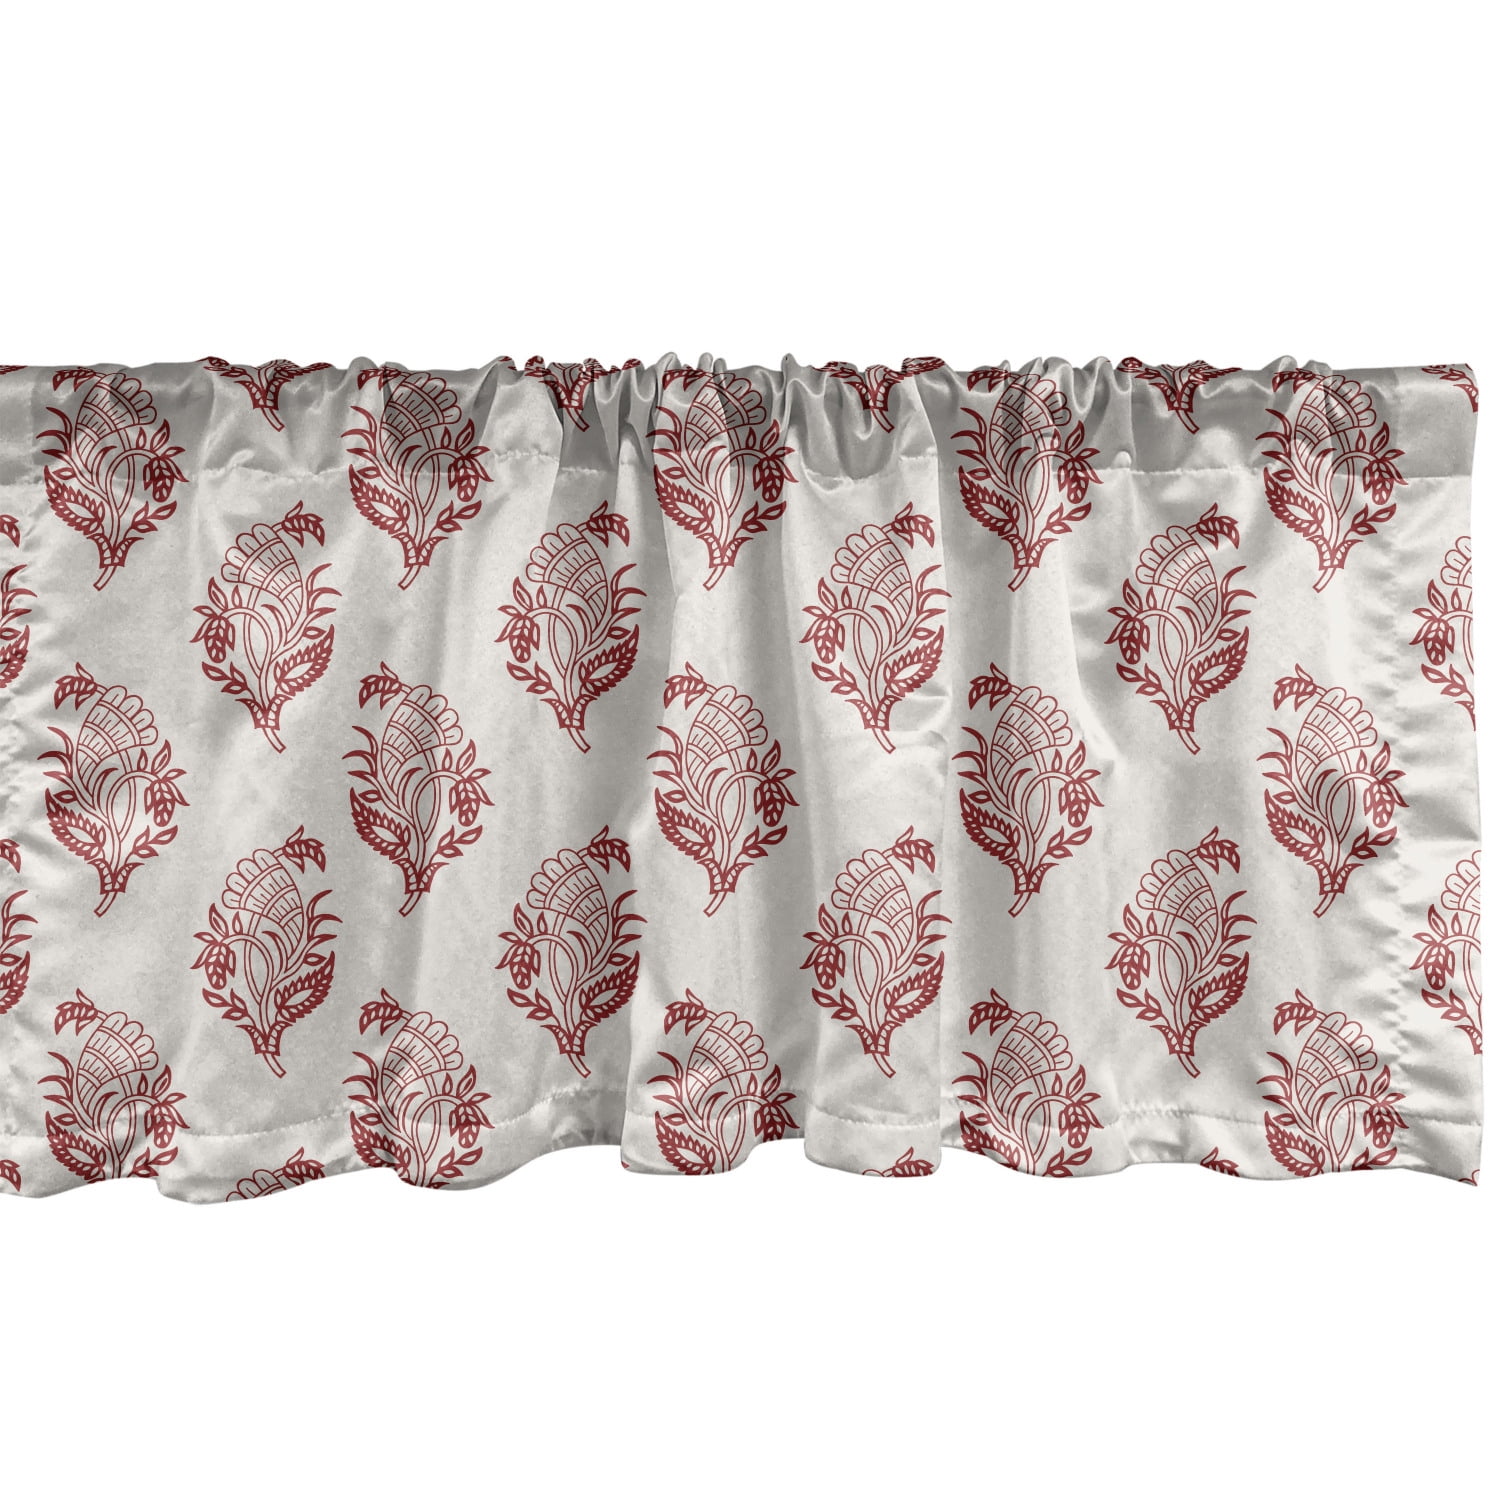 Ambesonne Vintage Window Valance, Simplistic Floral Pattern with